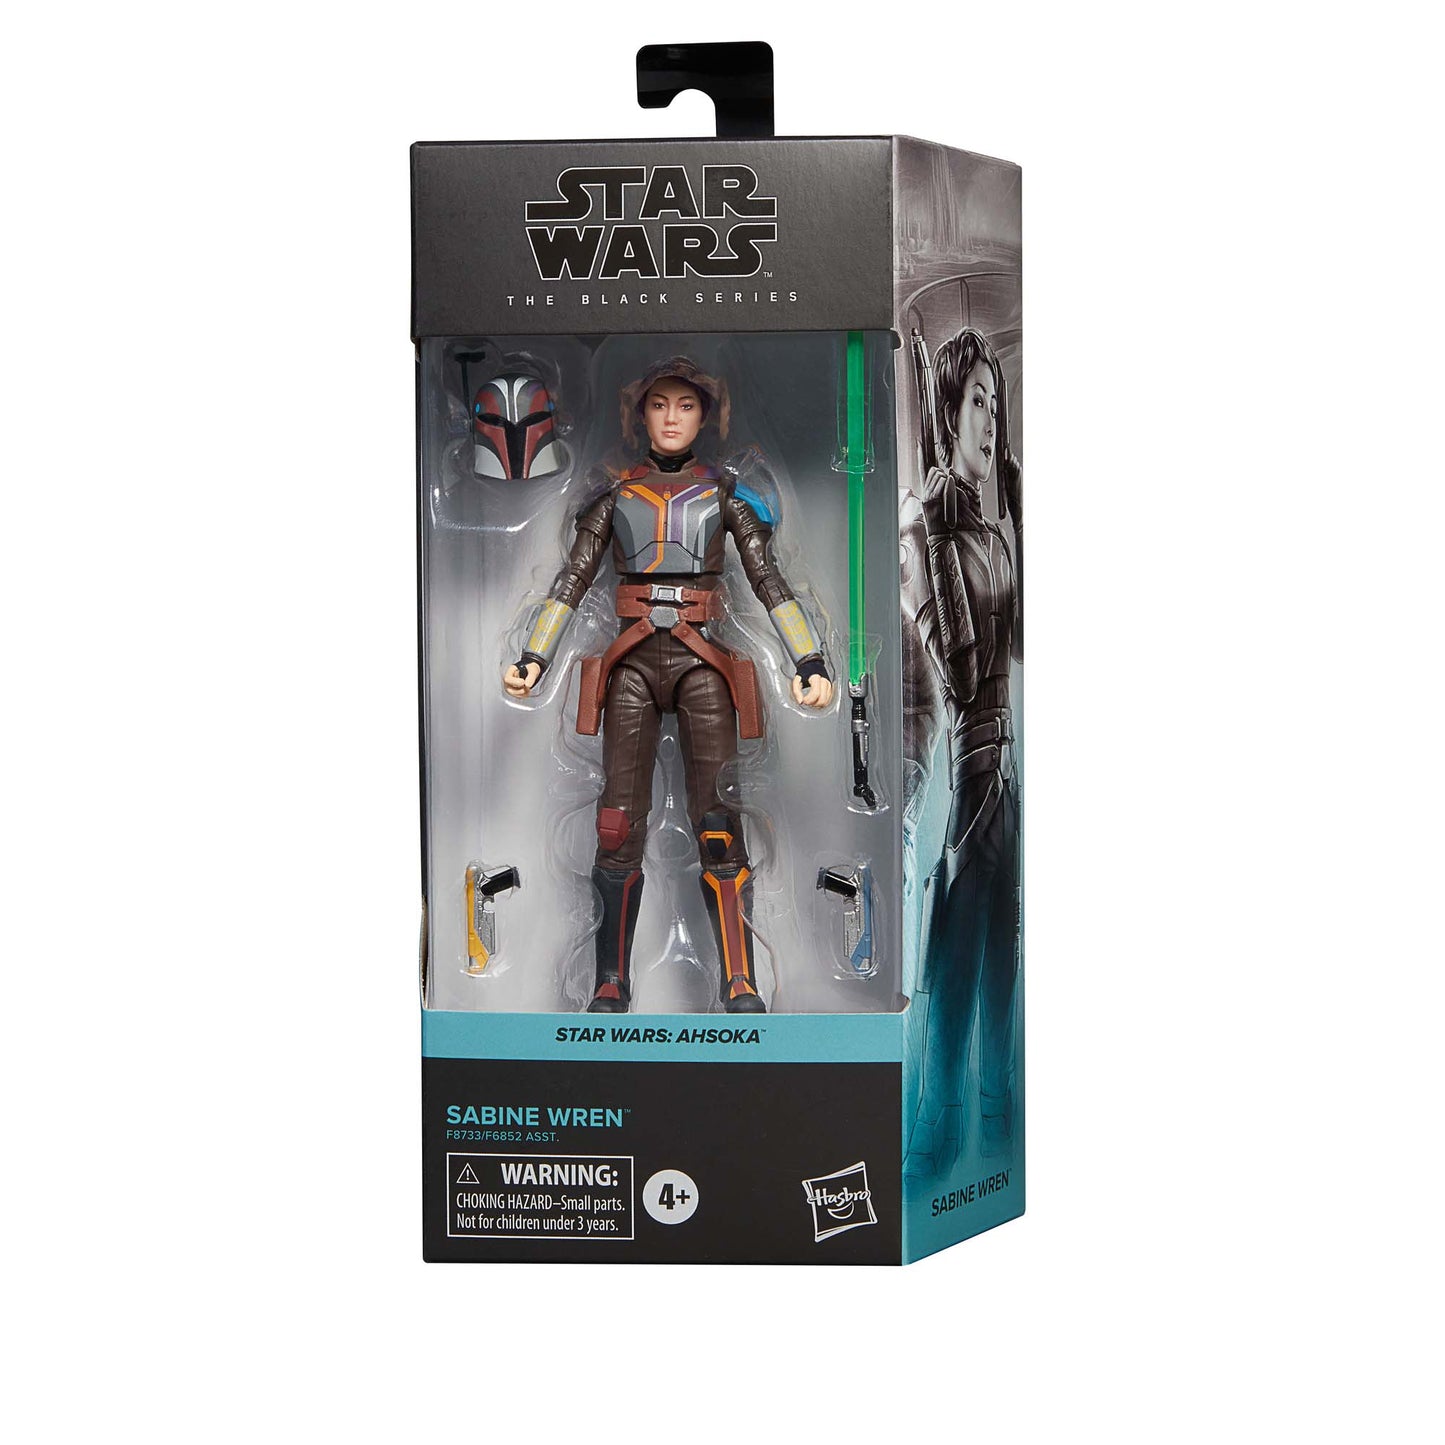 Star Wars The Black Series Sabine Wren 6-Inch Action Figure Toy in a package - heretoserveyou